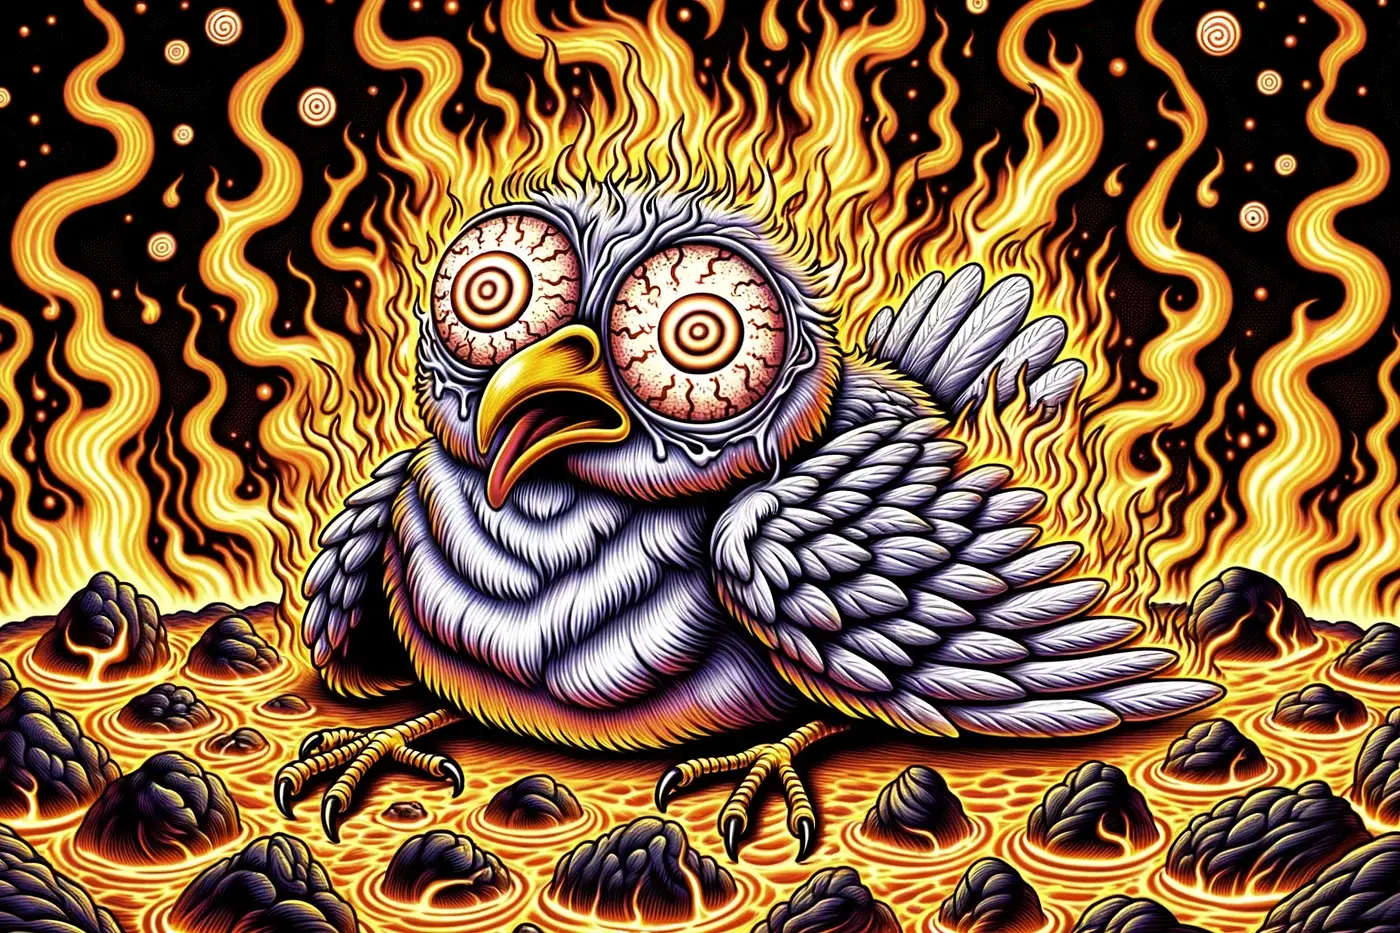 A bird who is tripping balls in a fiery hellscape.